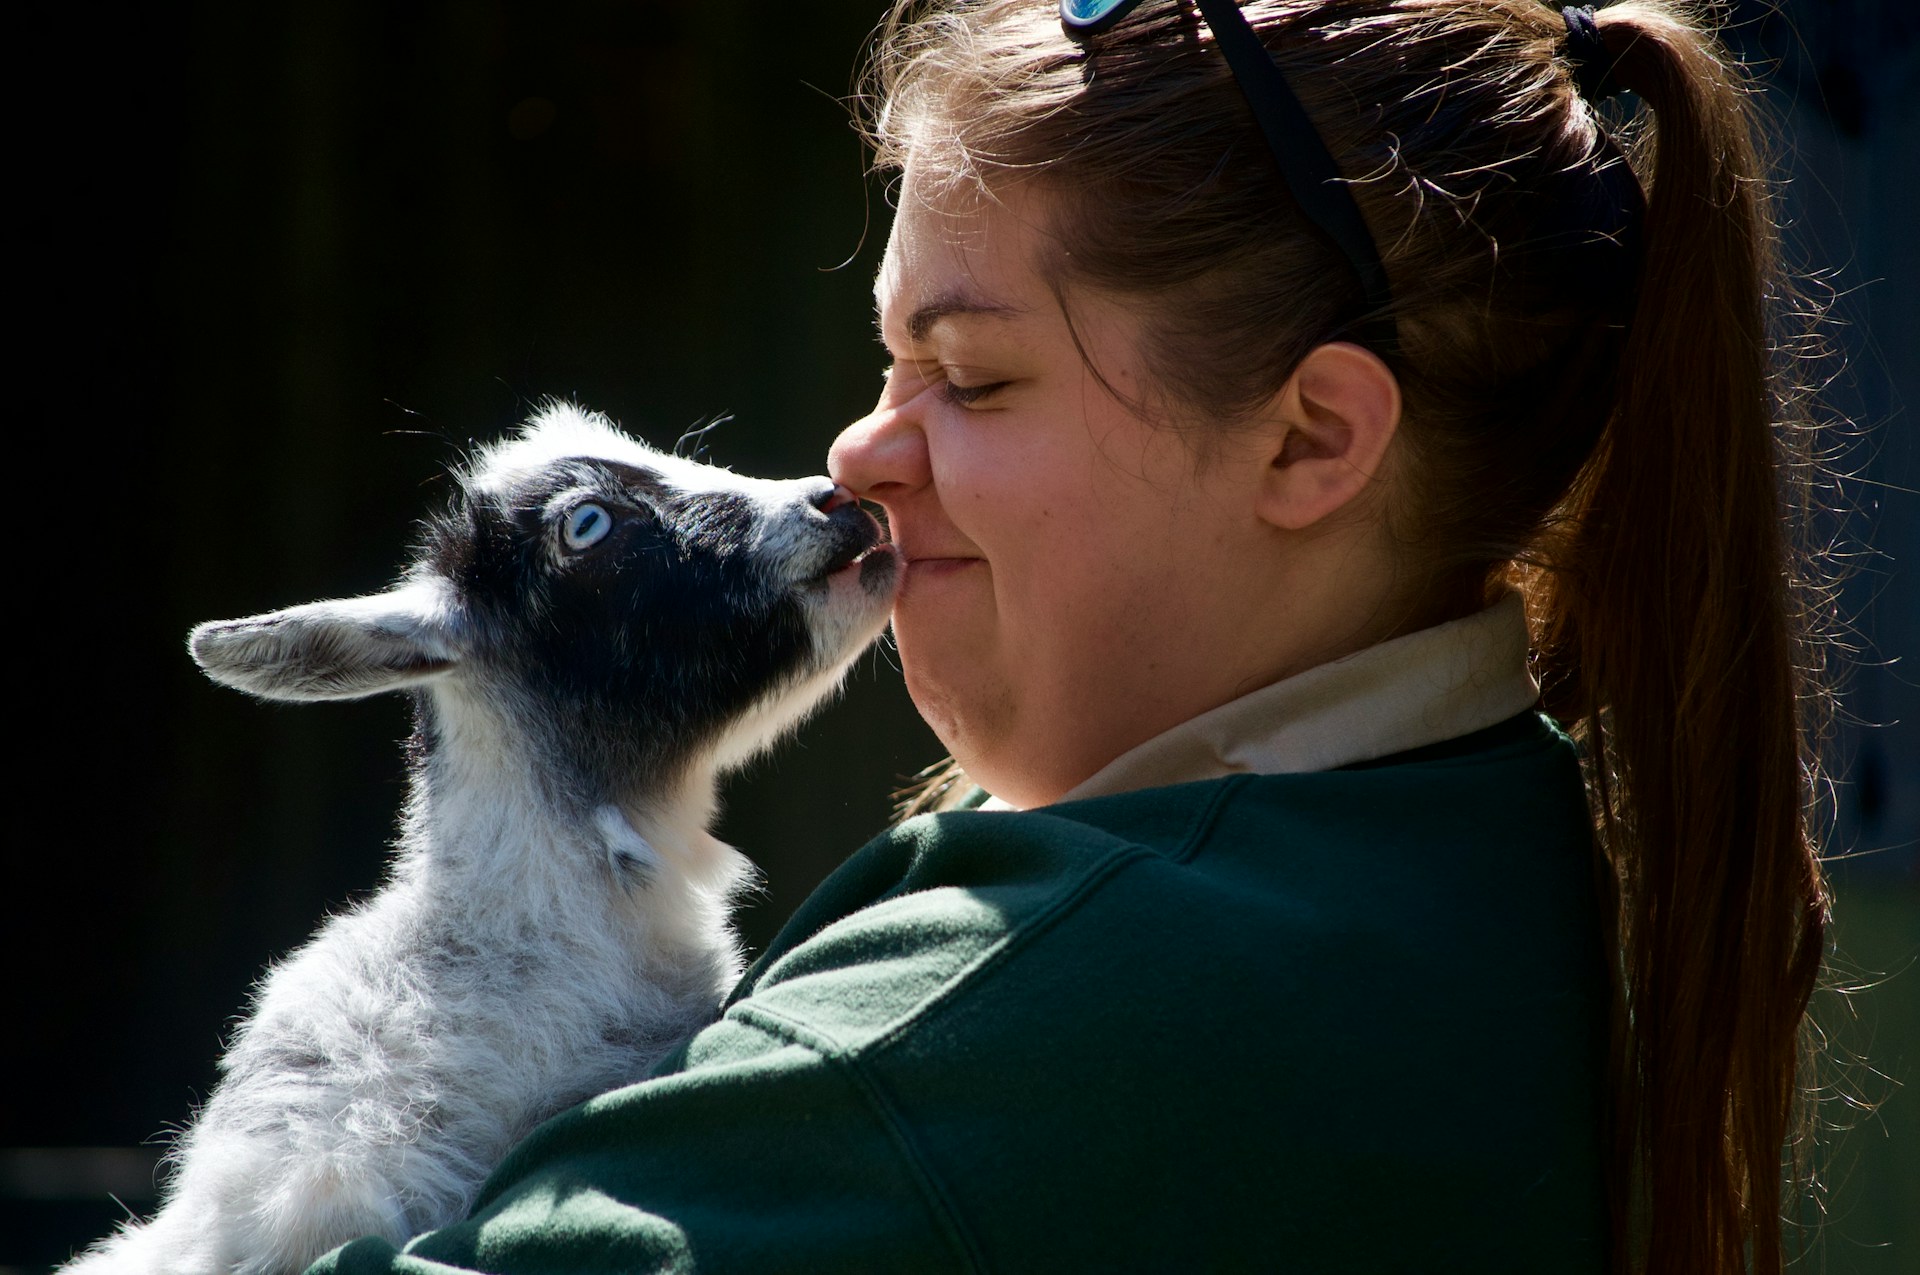 Woman in a green jacket holds a black and white goat